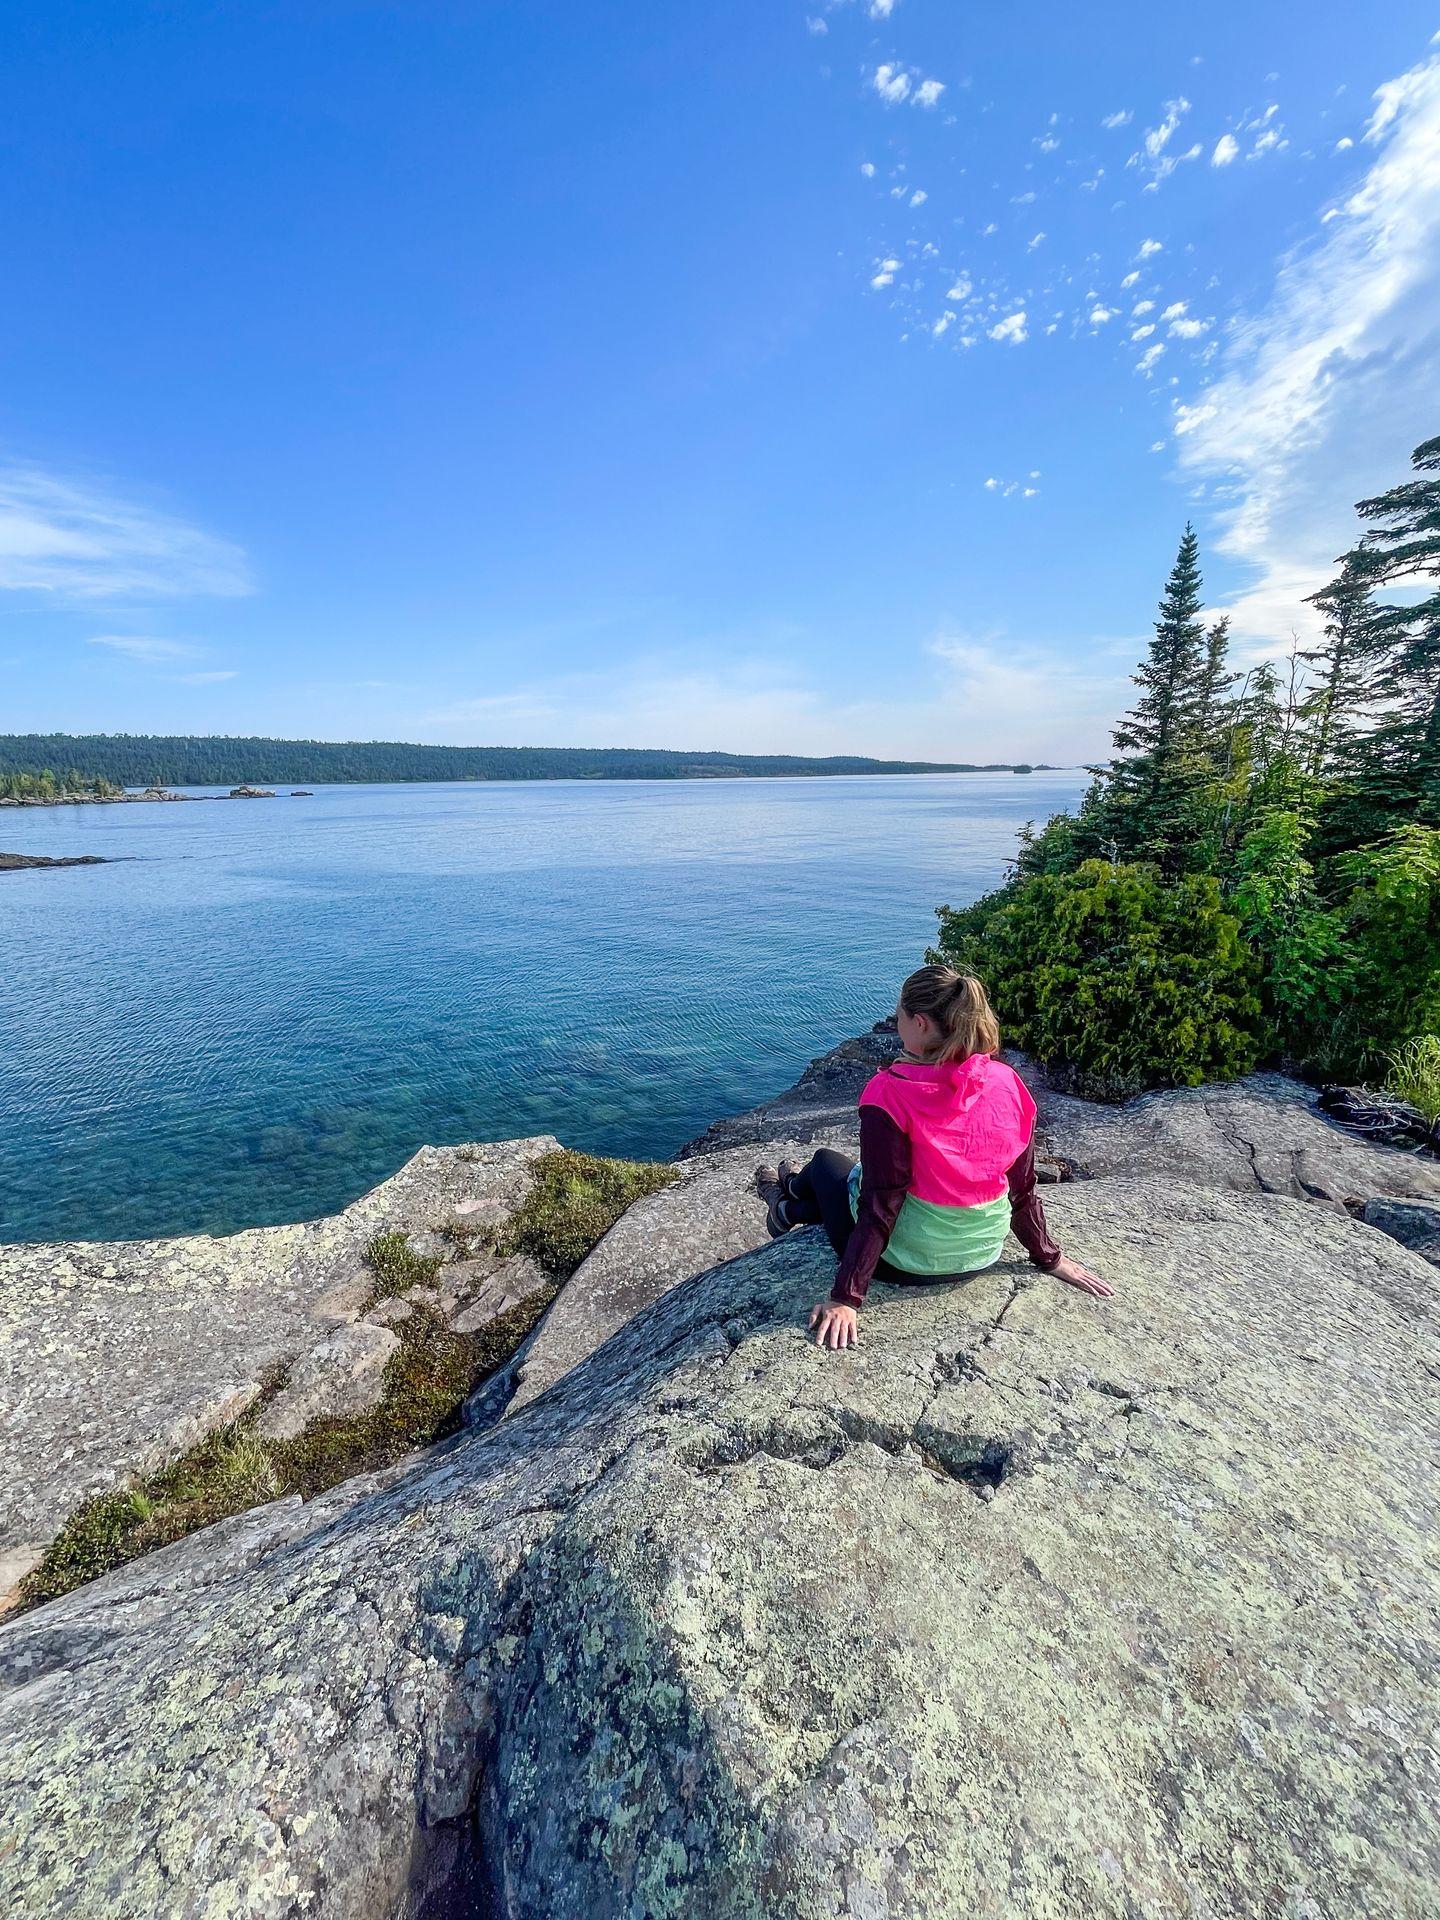 Lydia sitting on rocks and admiring the views from Scoville Point